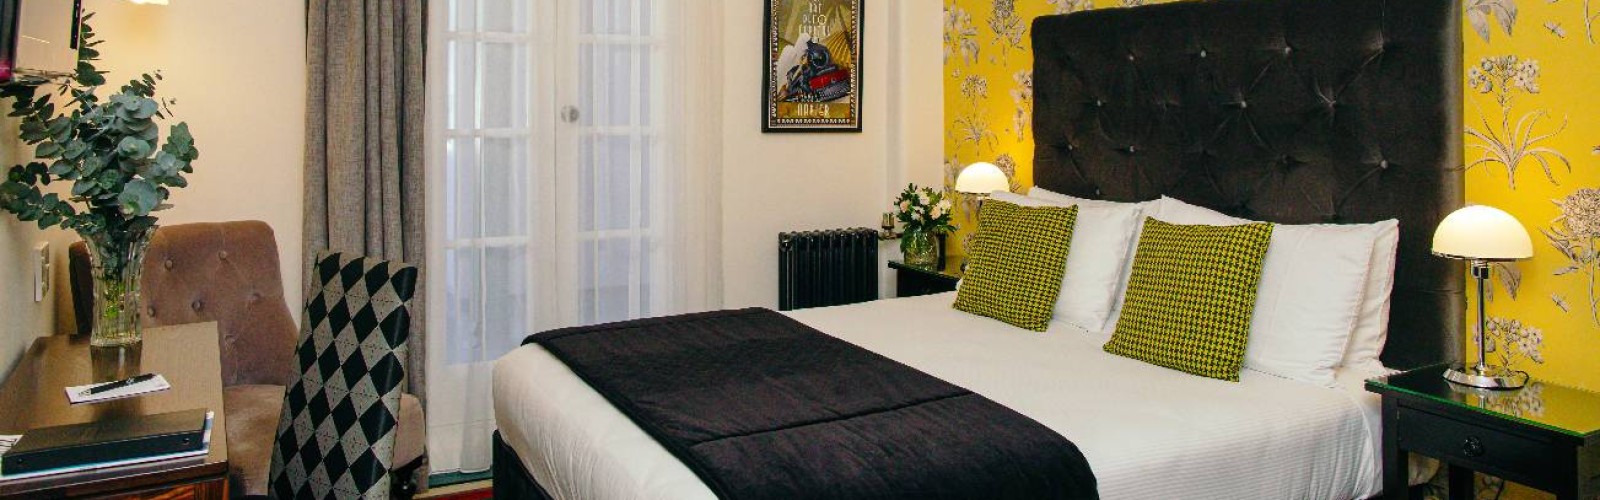 Superior Queen Rooms - Characterful and Convenient. 